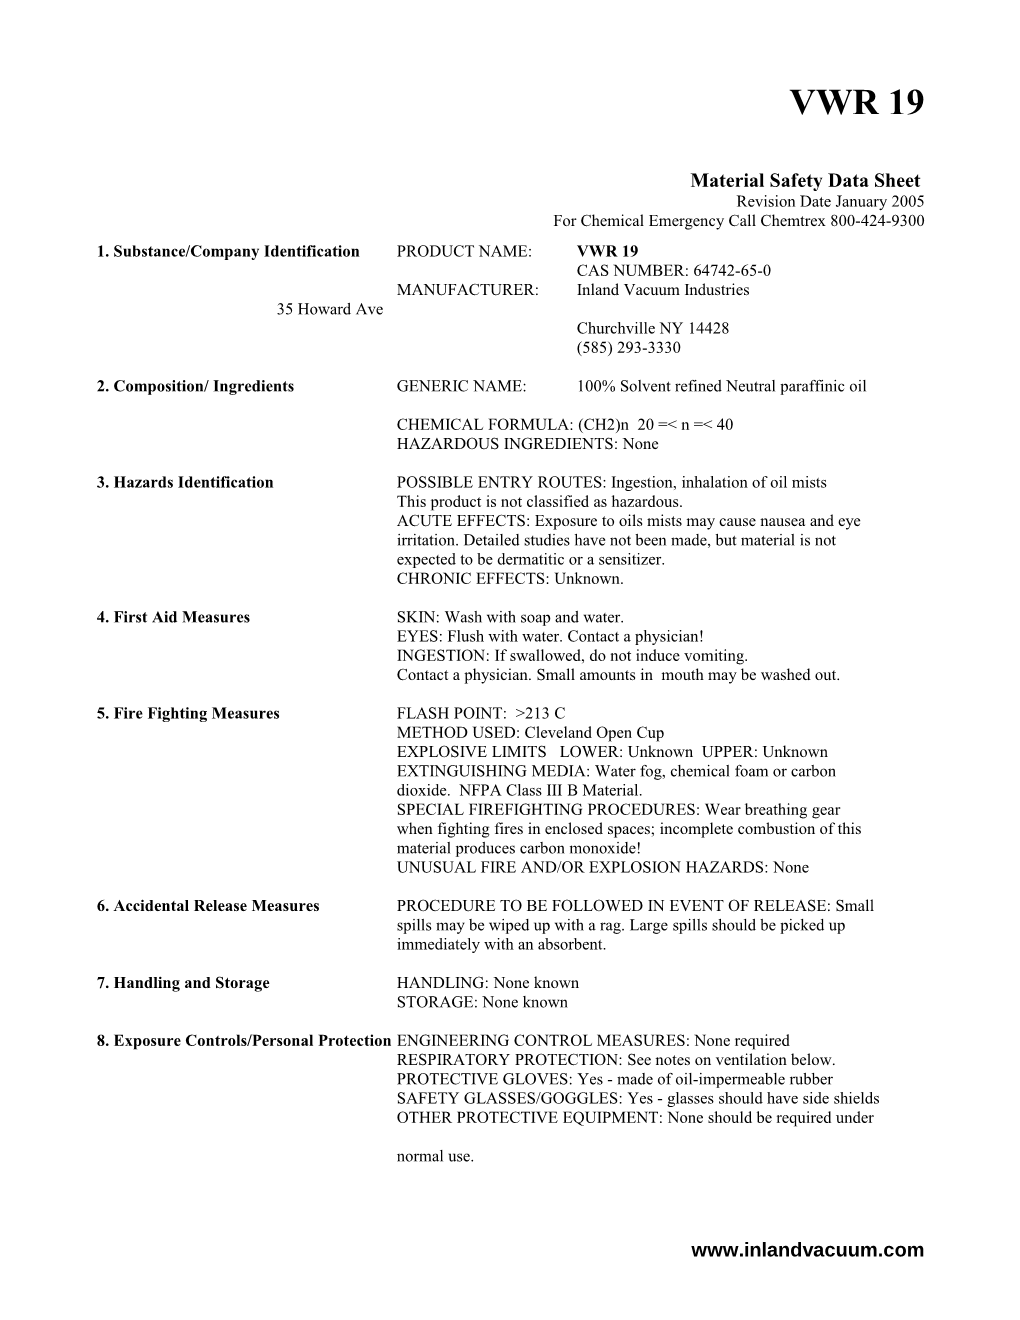 Material Safety Data Sheet s52